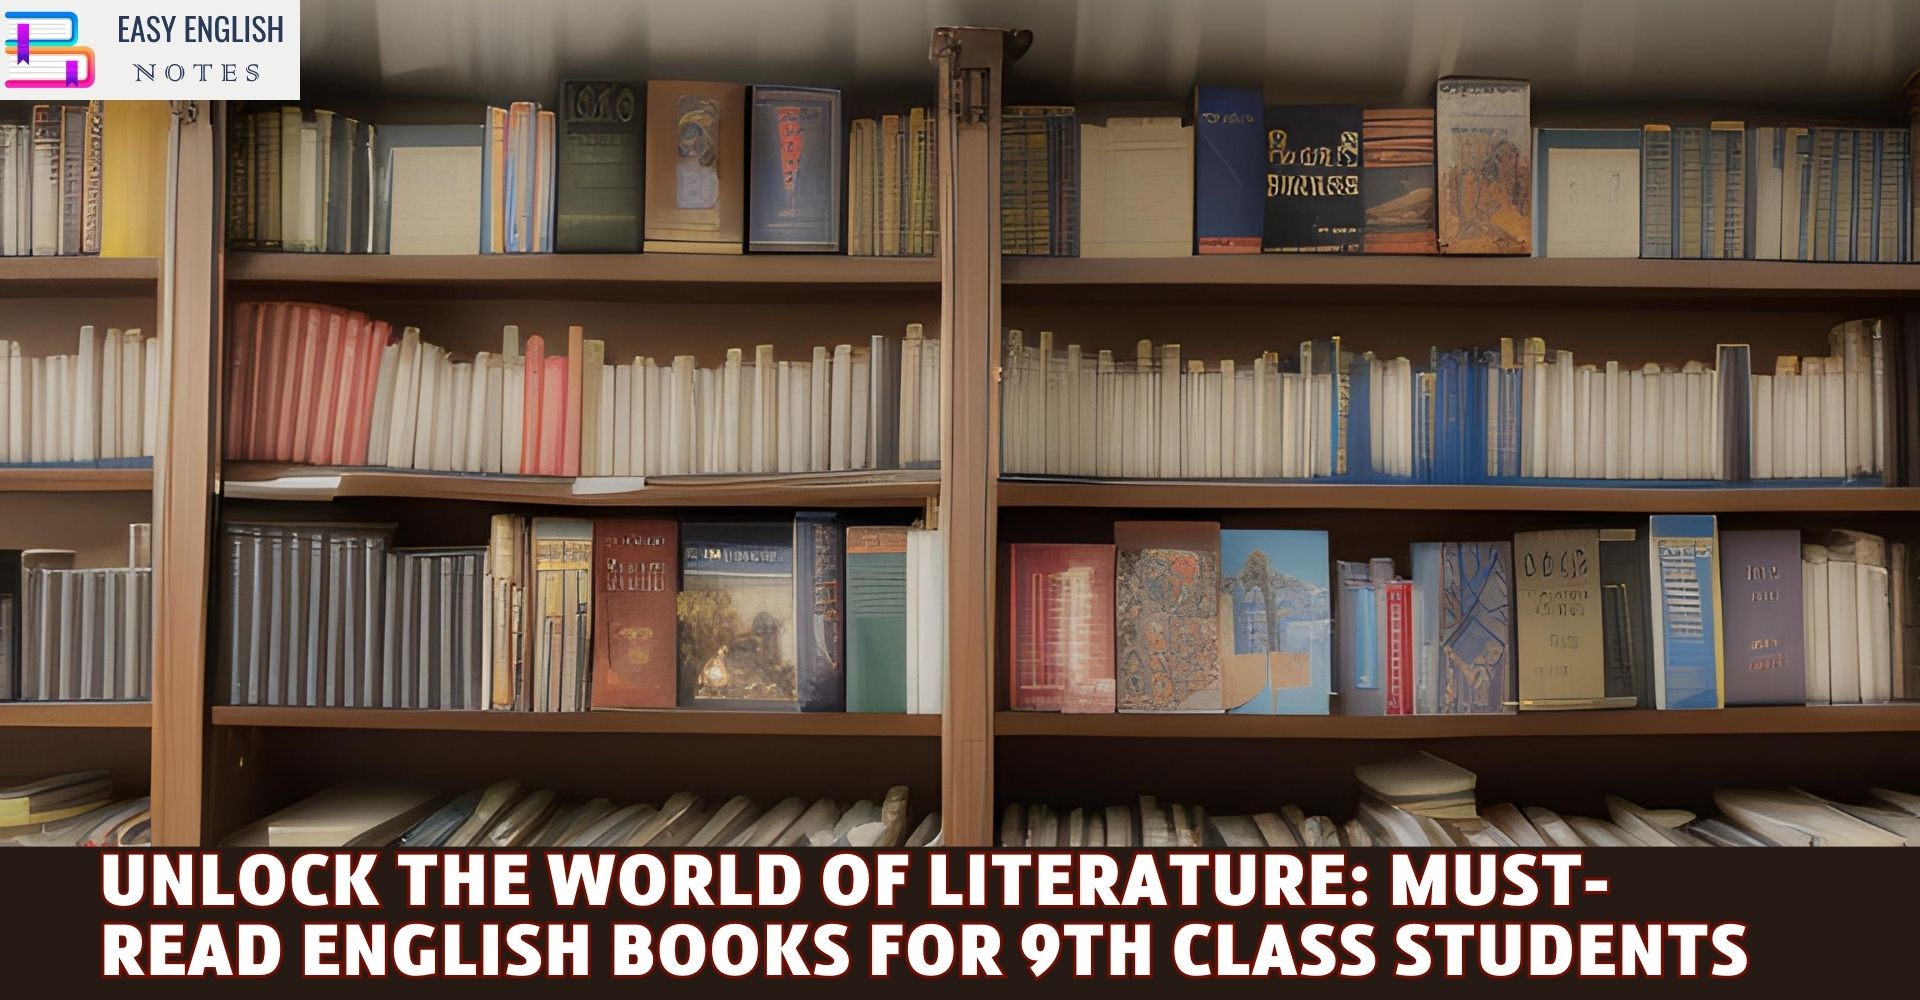 Unlock the World of Literature: Must-Read English Books for 9th Class Students